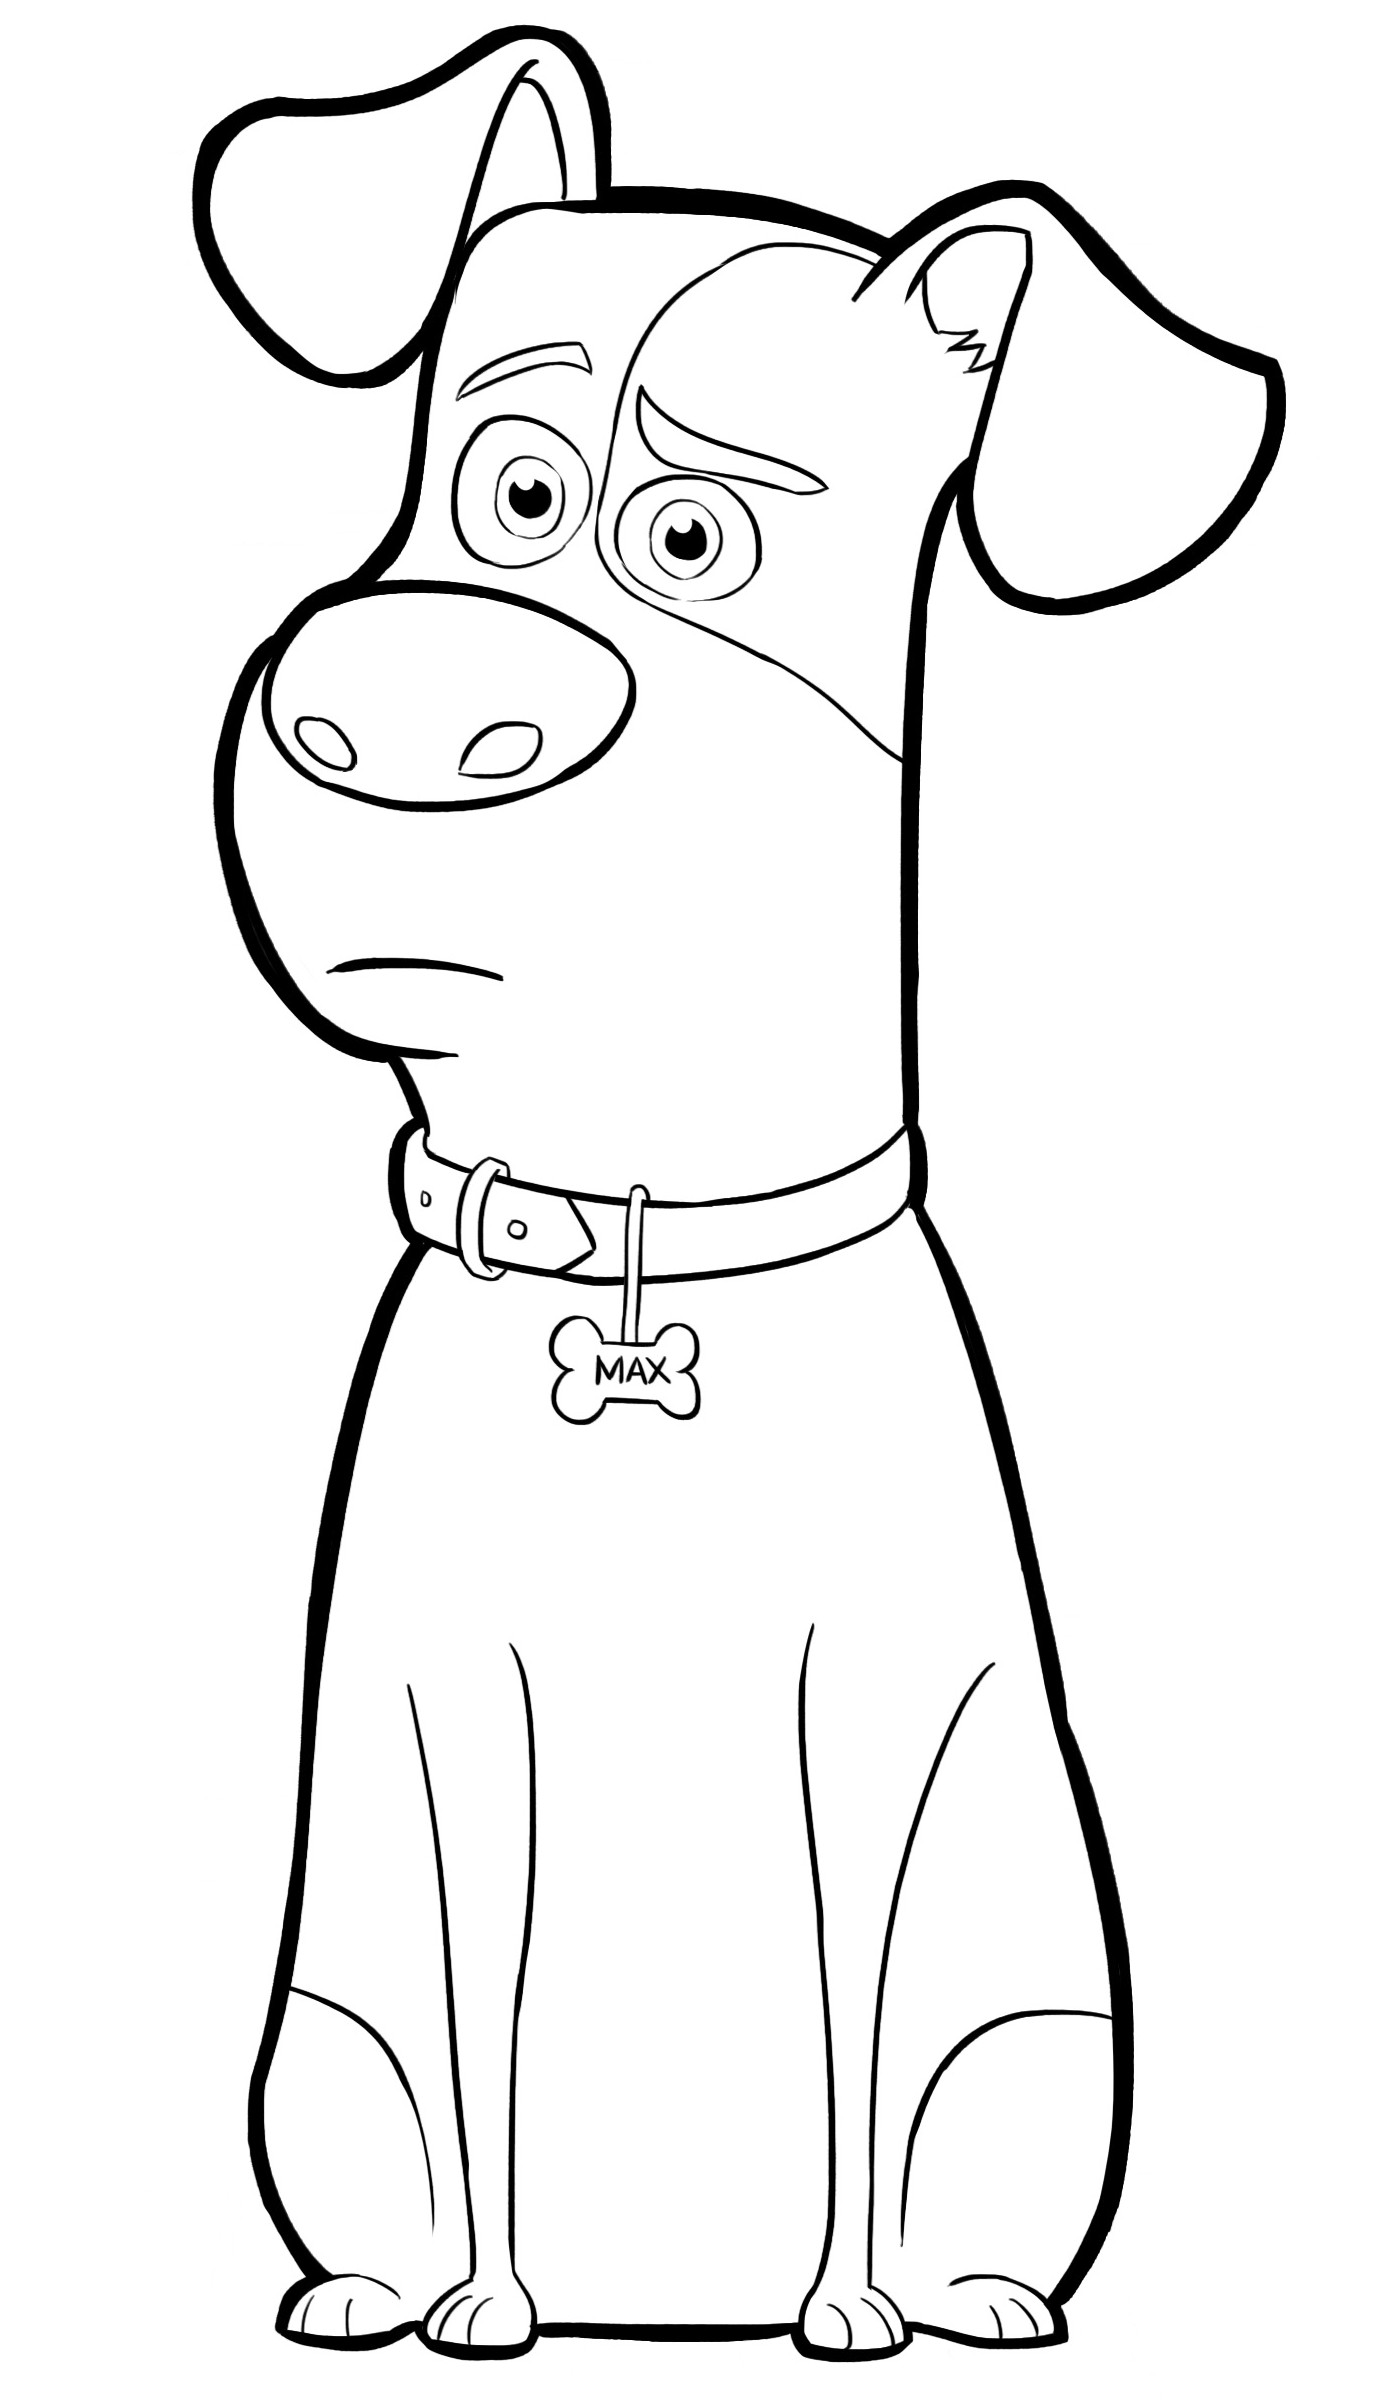 Coloring Book Pages For Kids
 Pets Coloring Pages Best Coloring Pages For Kids